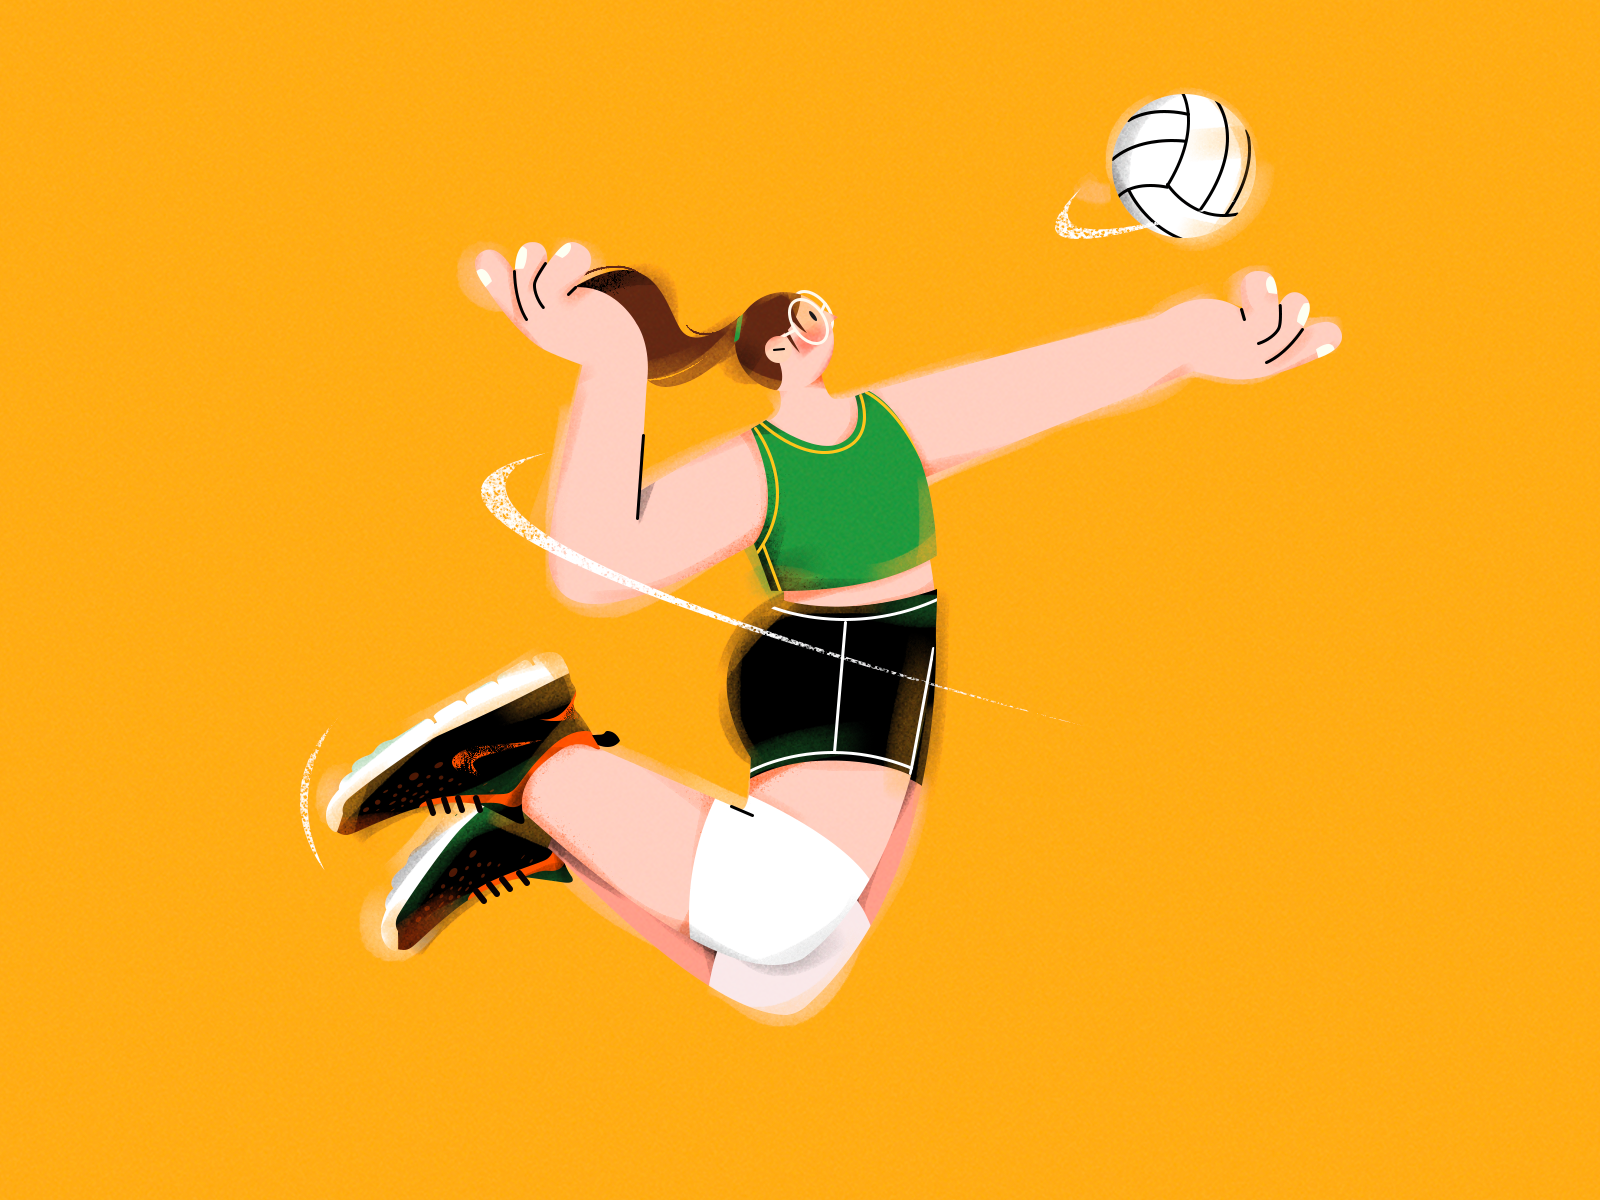 J.(Volleyball girl) character girl illustration shoes sports vector vector art volleyball